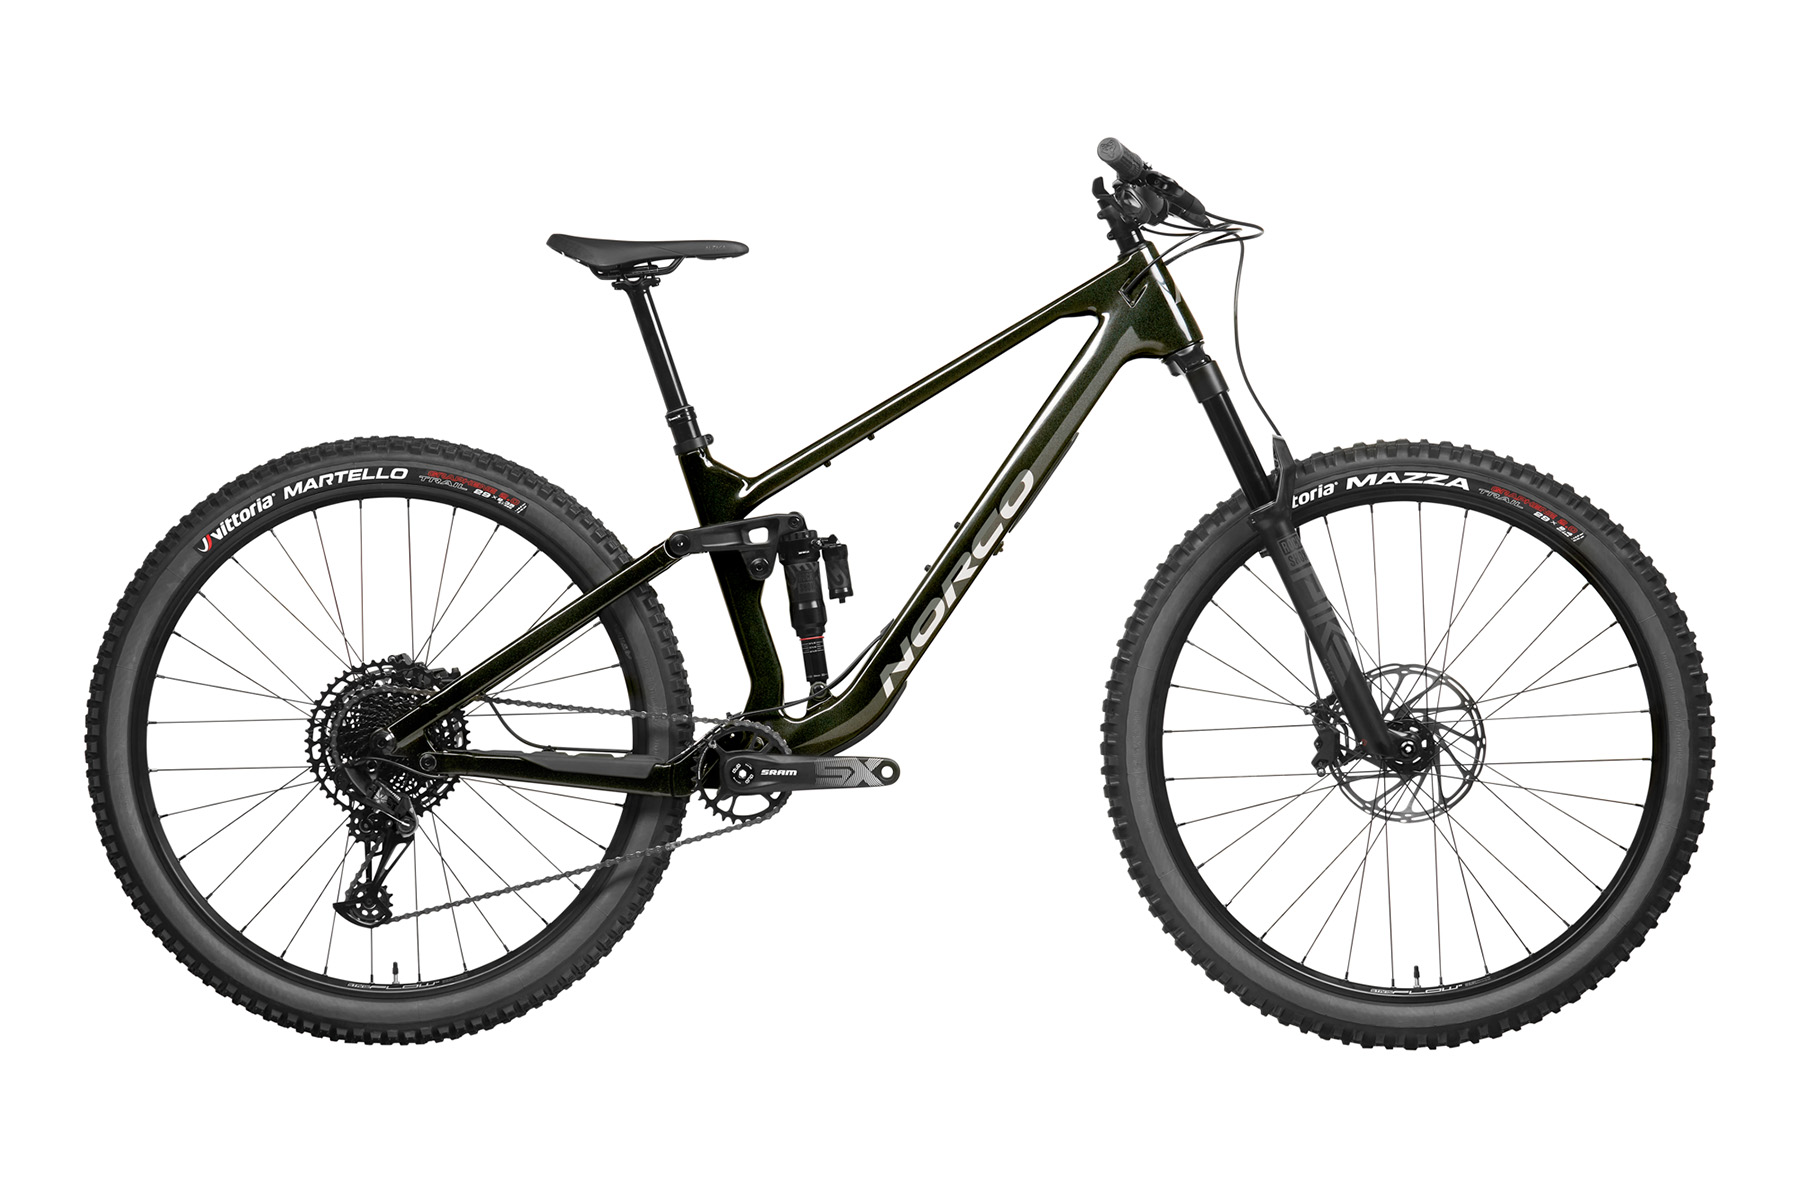 Dylan Wood reviews the Norco Fluid FS Carbon for Blister